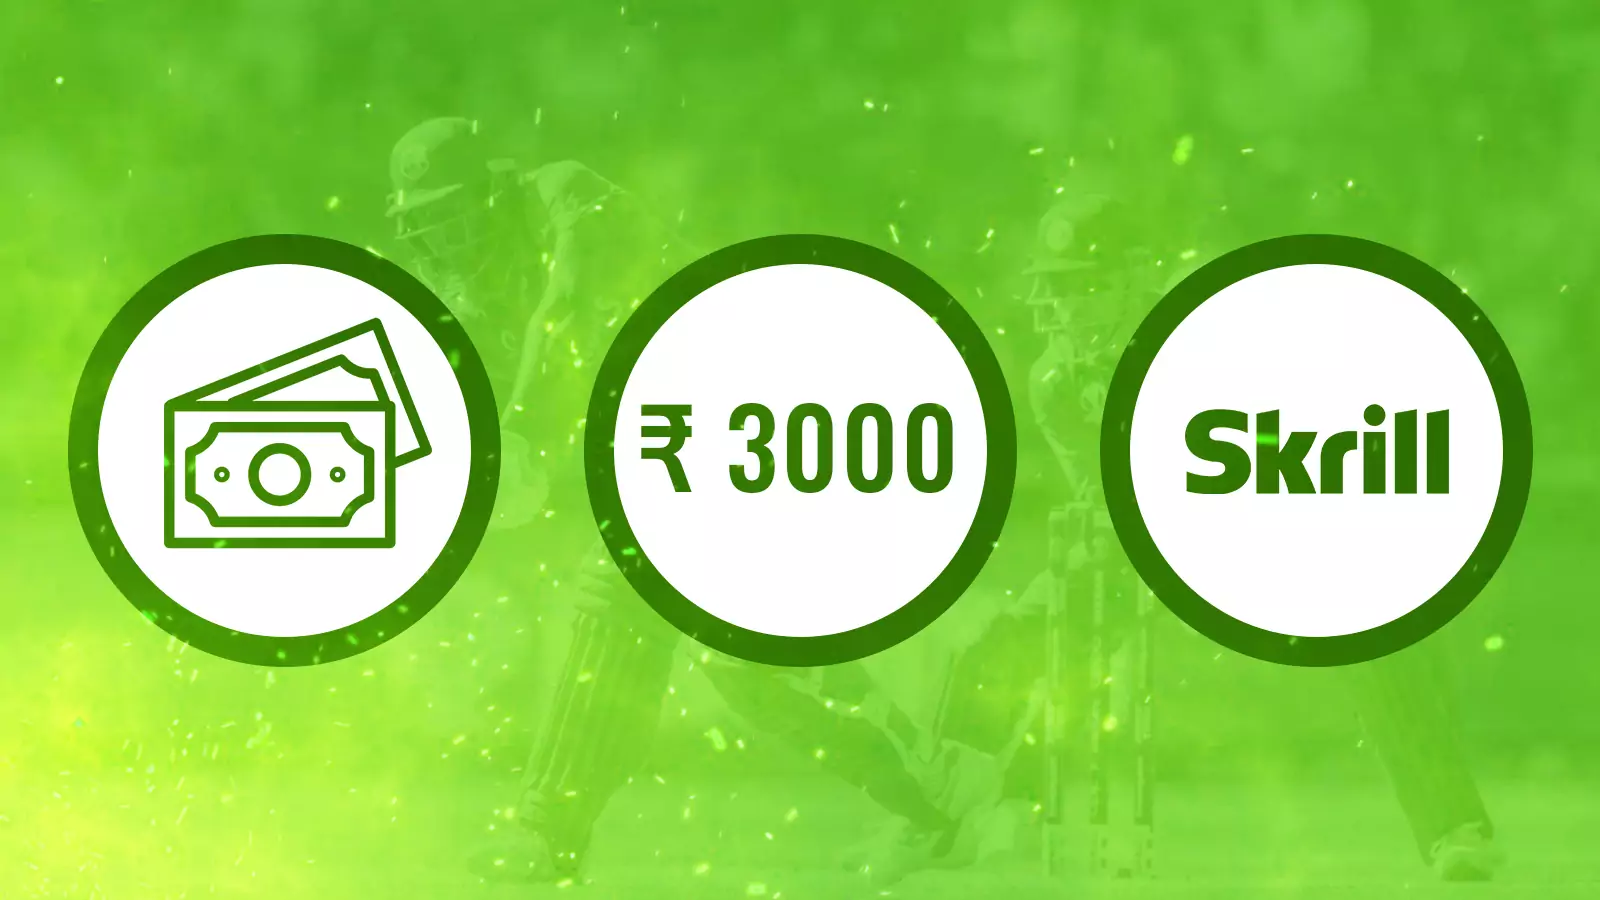 You can use immediate money transfers between Skill and Neteller.